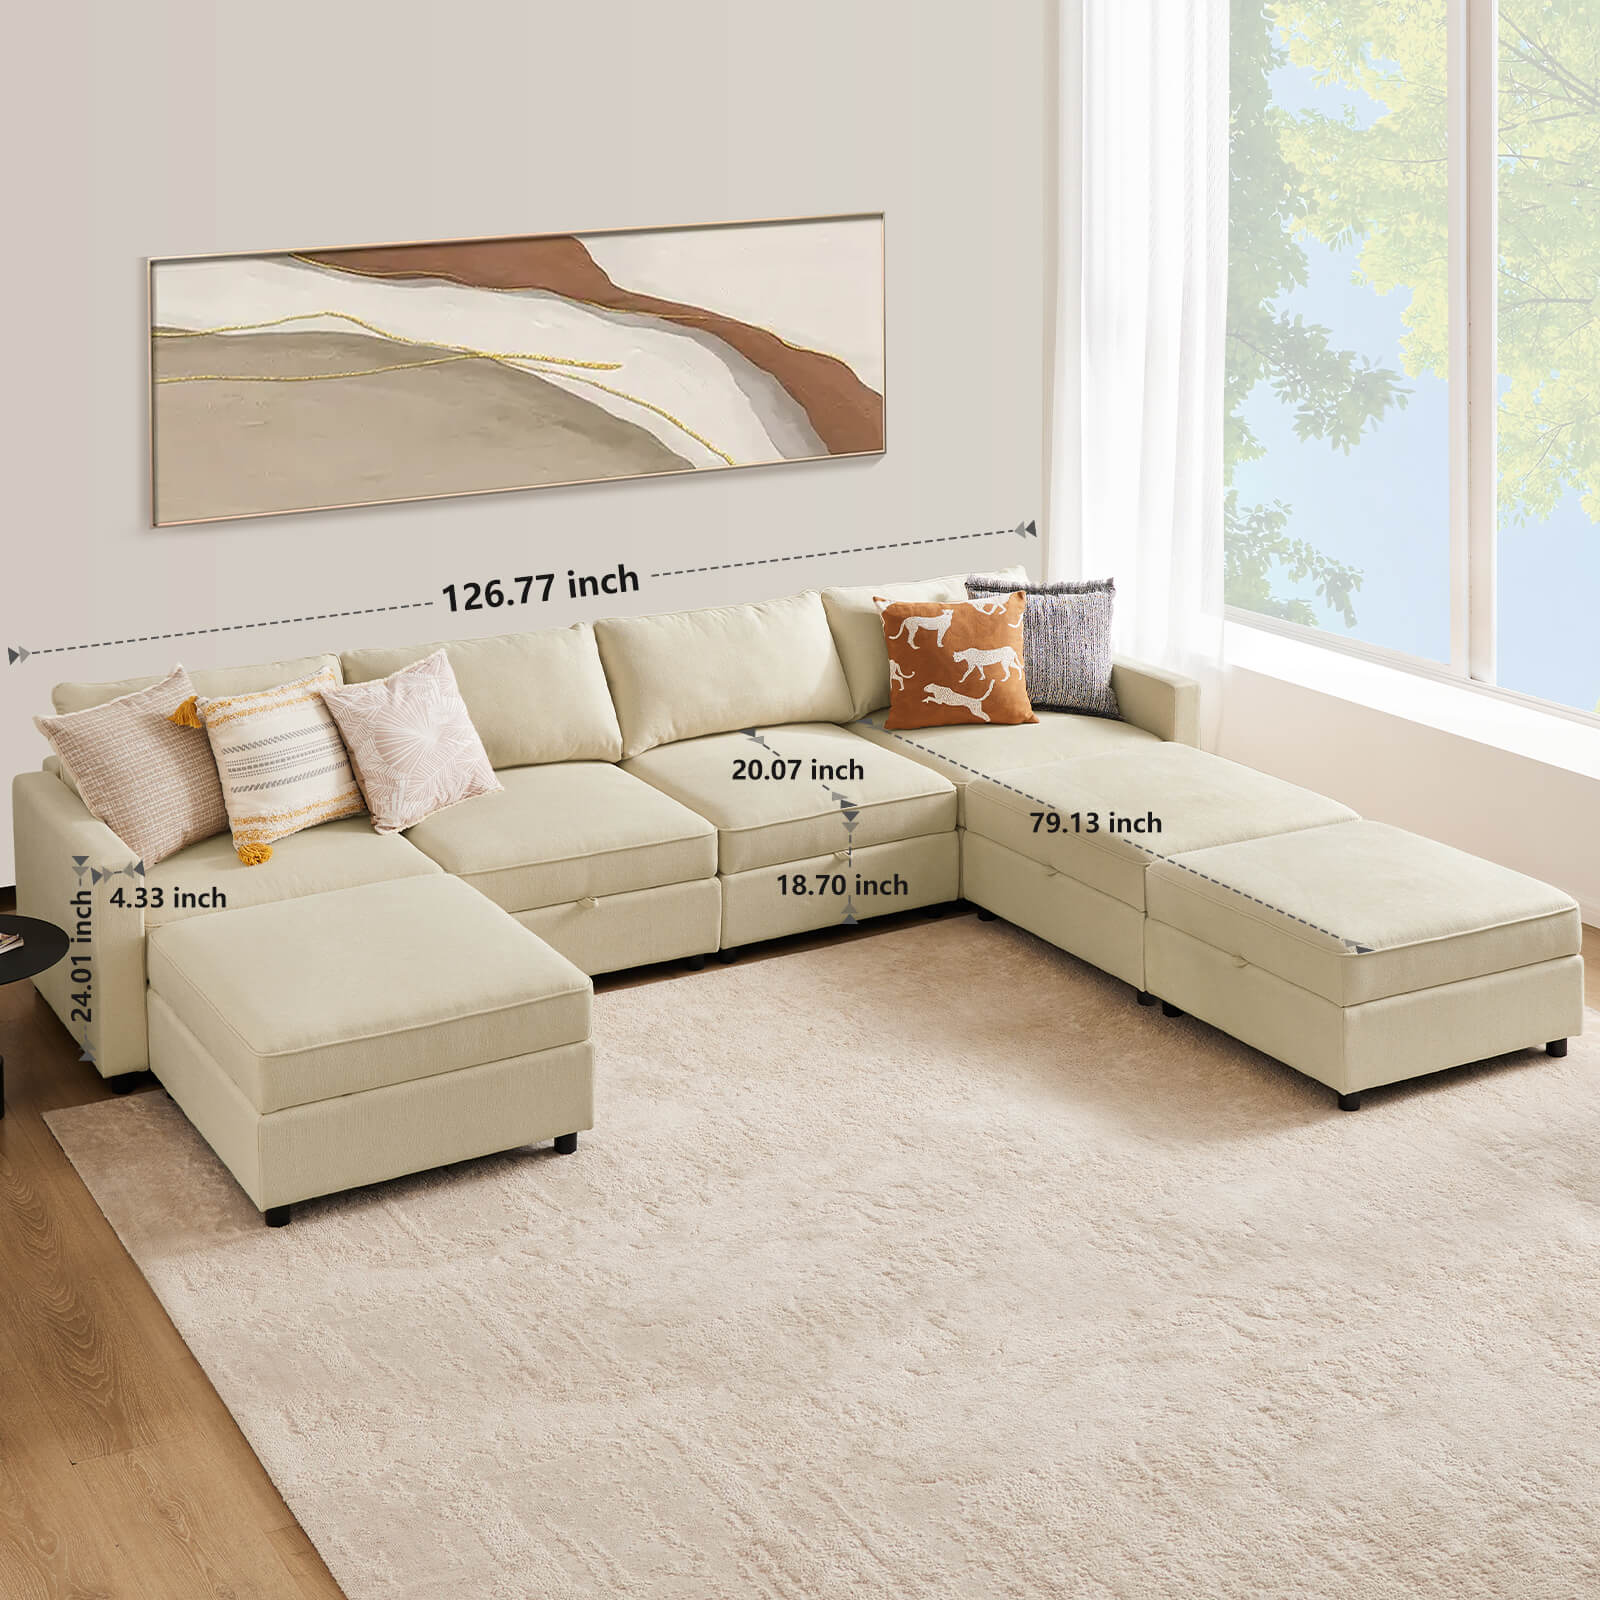 Convertible Sectional Sofa Couch-with Storage for Living Room, U-Shaped Modern Modular Sofa Sleeper with Reversible Chaise